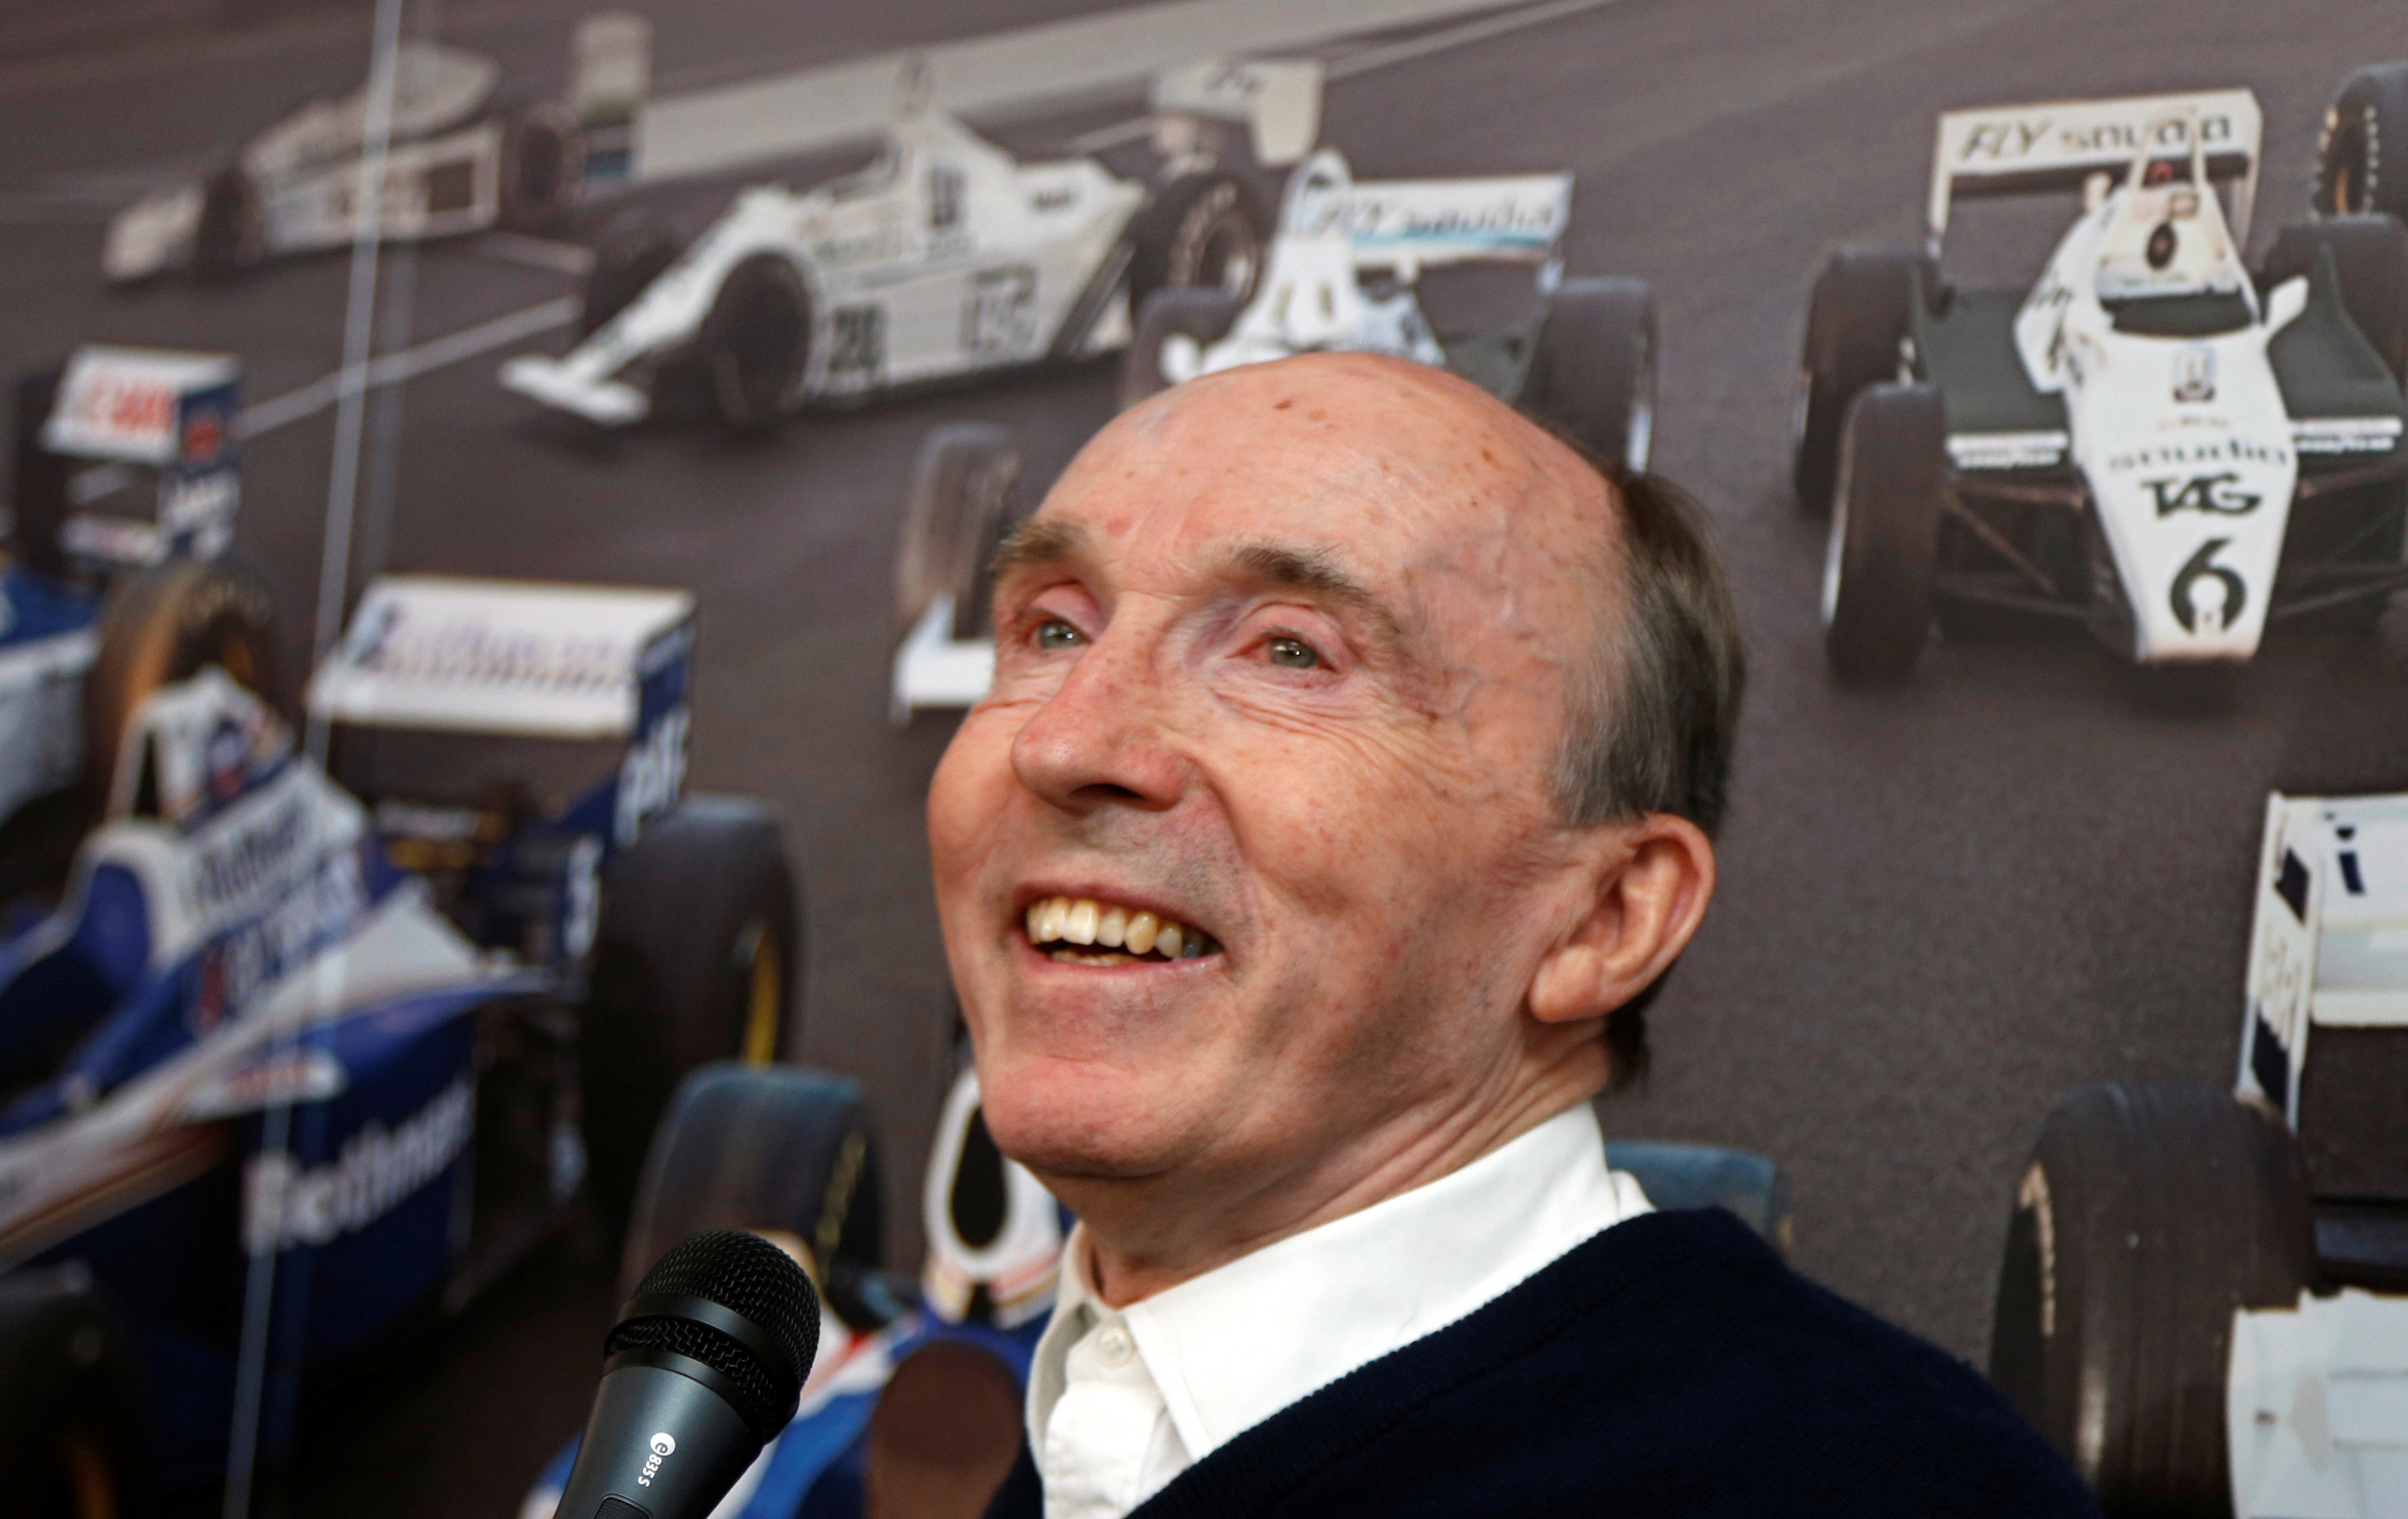 Williams Formula One team founder Frank Williams speaks during a party marking the team's 600th race, ahead of the British Grand Prix at the Silverstone Race circuit, central England, June 29, 2013.  REUTERS/Chris Helgren/File Photo